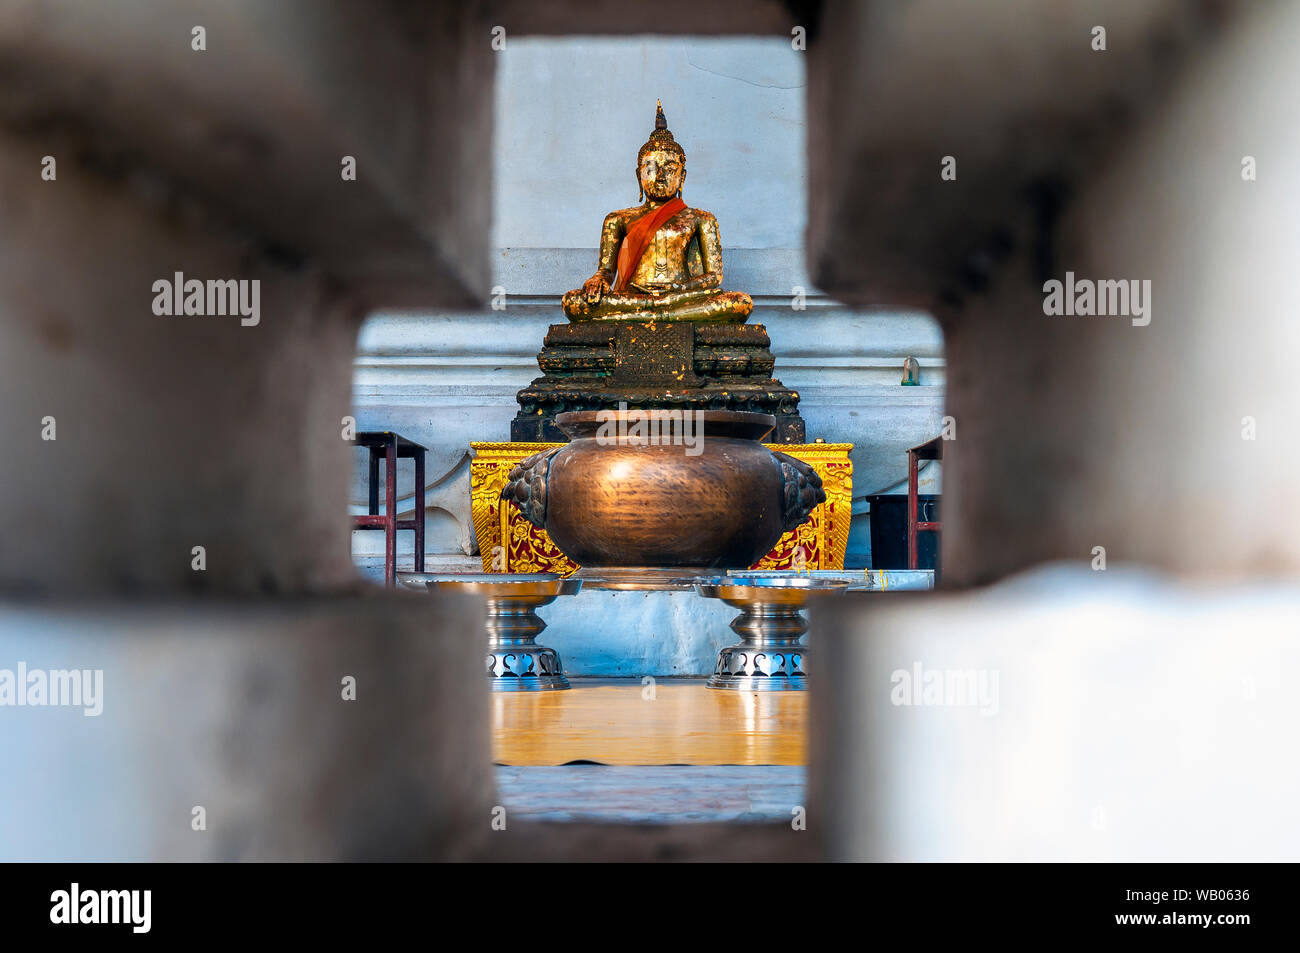 Perspective of a buddha statue in meditation position and covered with gold leaves, Ayutthaya, Thailand. Stock Photo